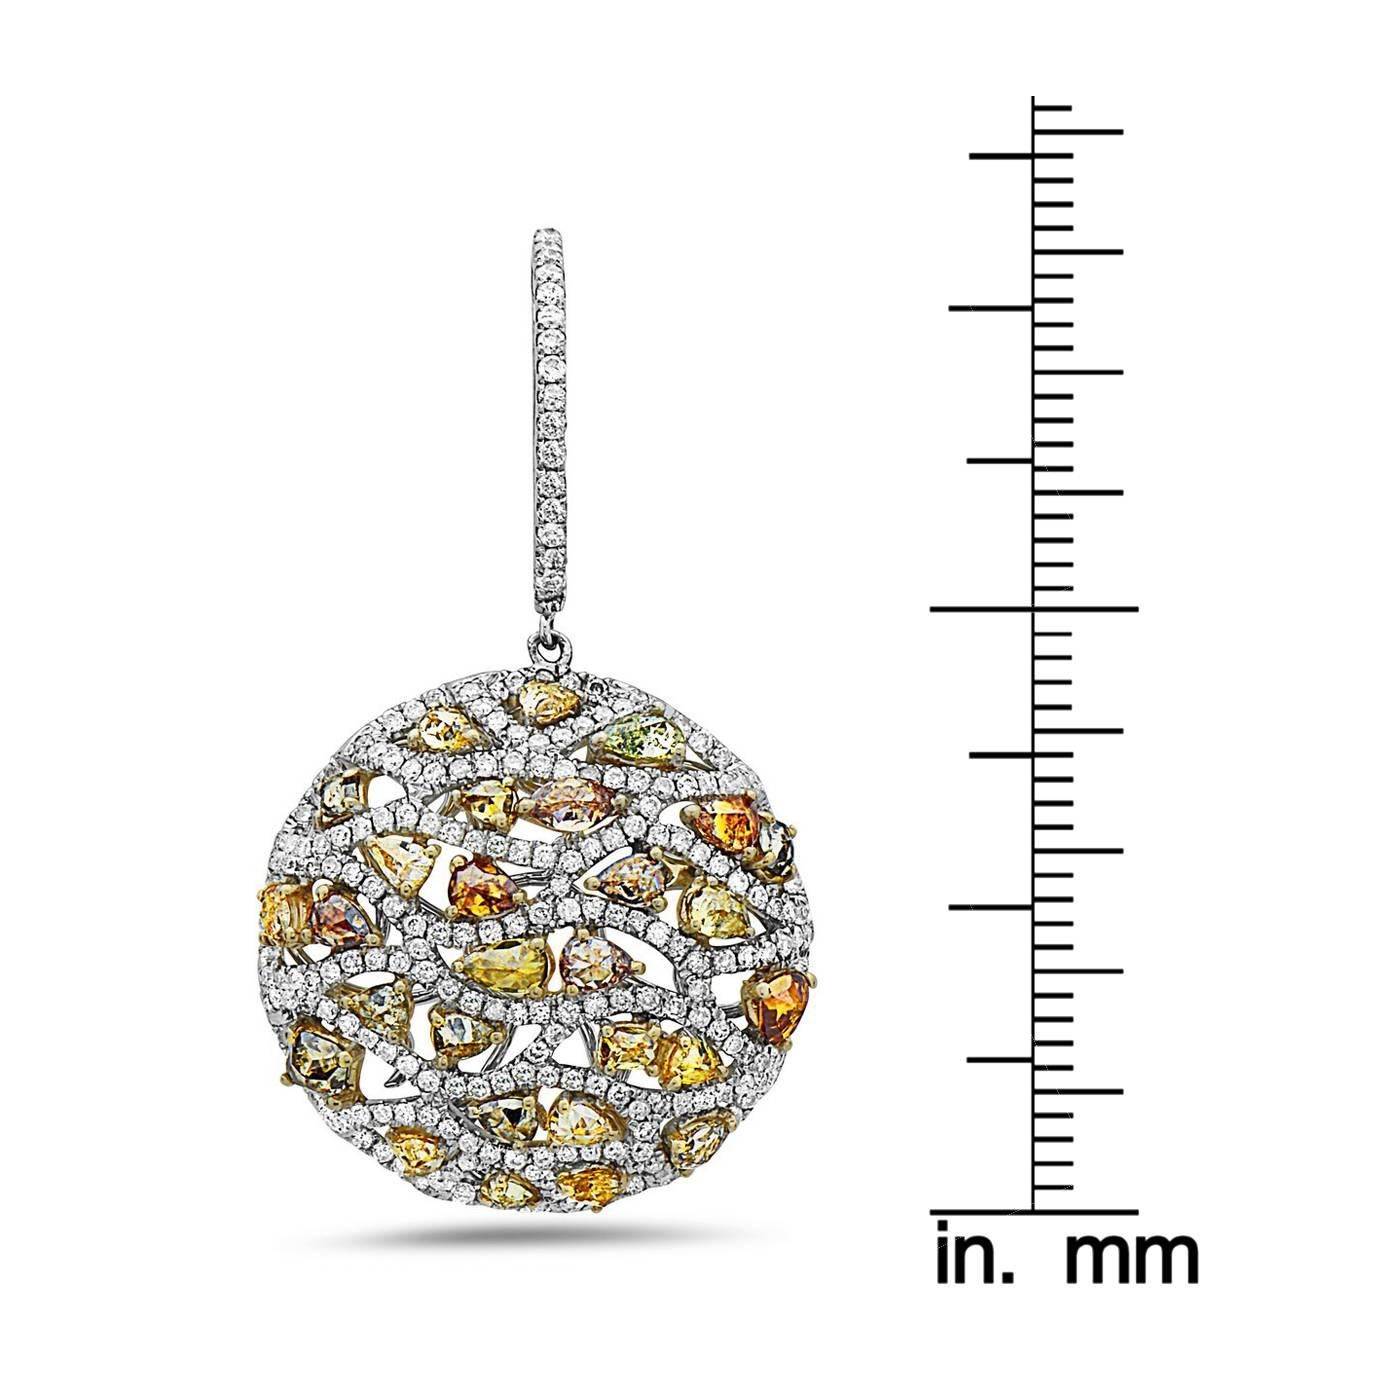 Approx total weight: 7.16 cts
Diamond Color: Fancy yellow, orange, green diamonds. 
Diamond Clarity: Vs 
All pieces come with a professional appraisal from GAL, a reputable lab accepted by most insurance companies which will include the retail value